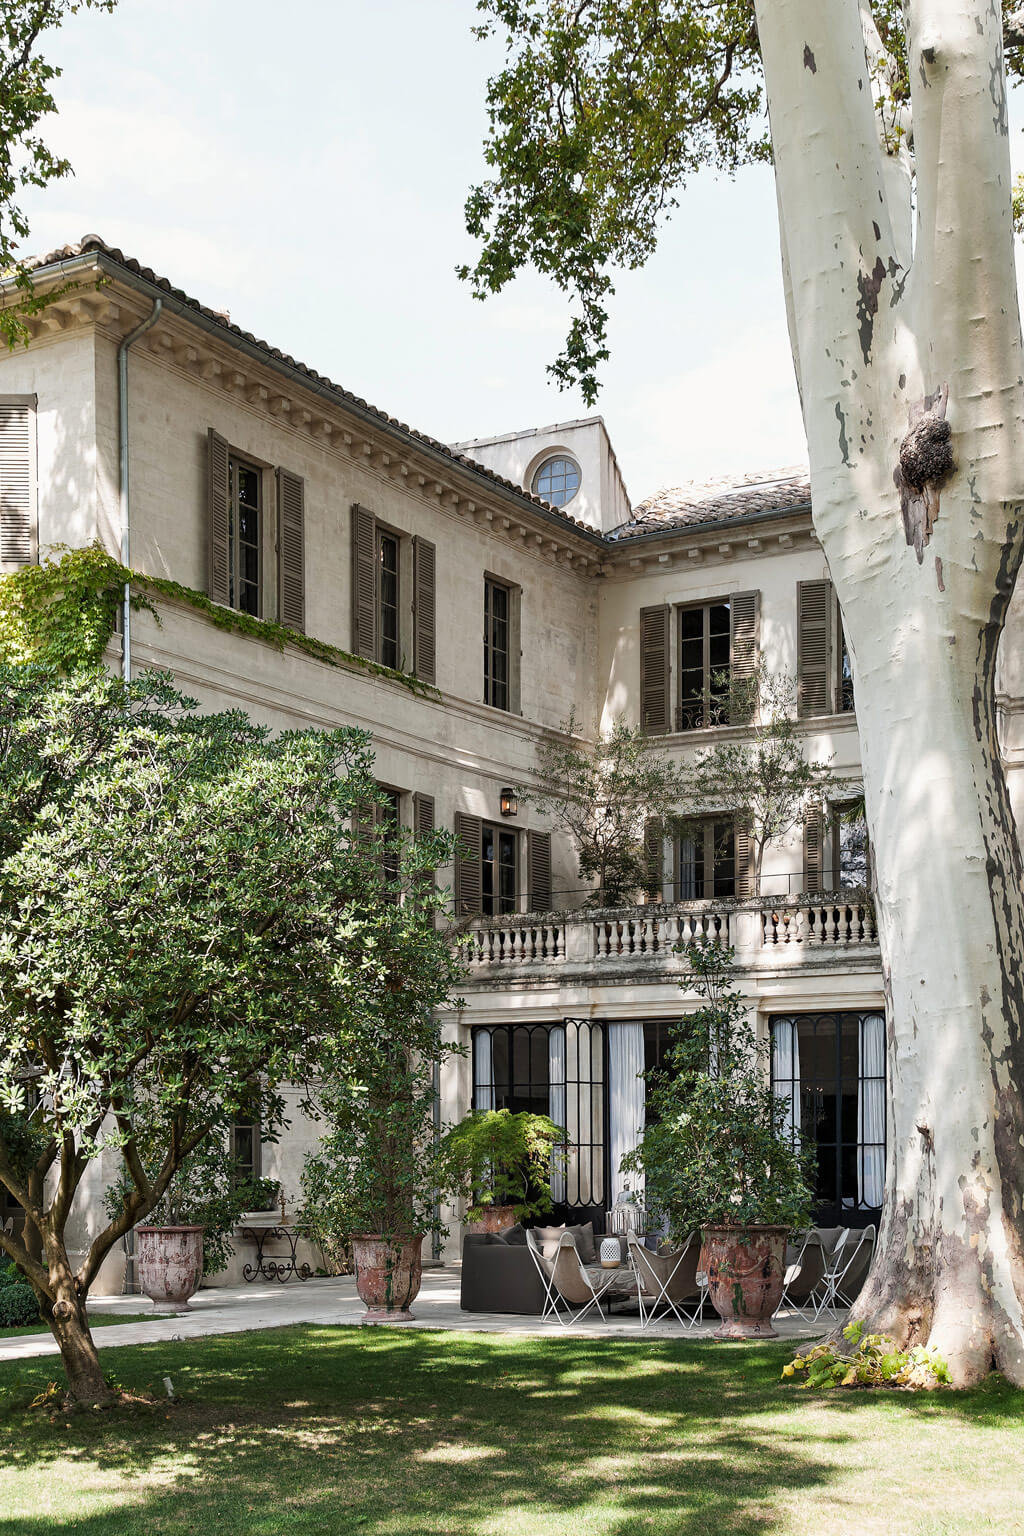 Beautiful French country garden inspiration from a luxurious property in the South of France. Breathtaking 19th century restored French chateau with largest private garden in Avignon. Avignon Hôtel Particulier. Photo: Haven In.